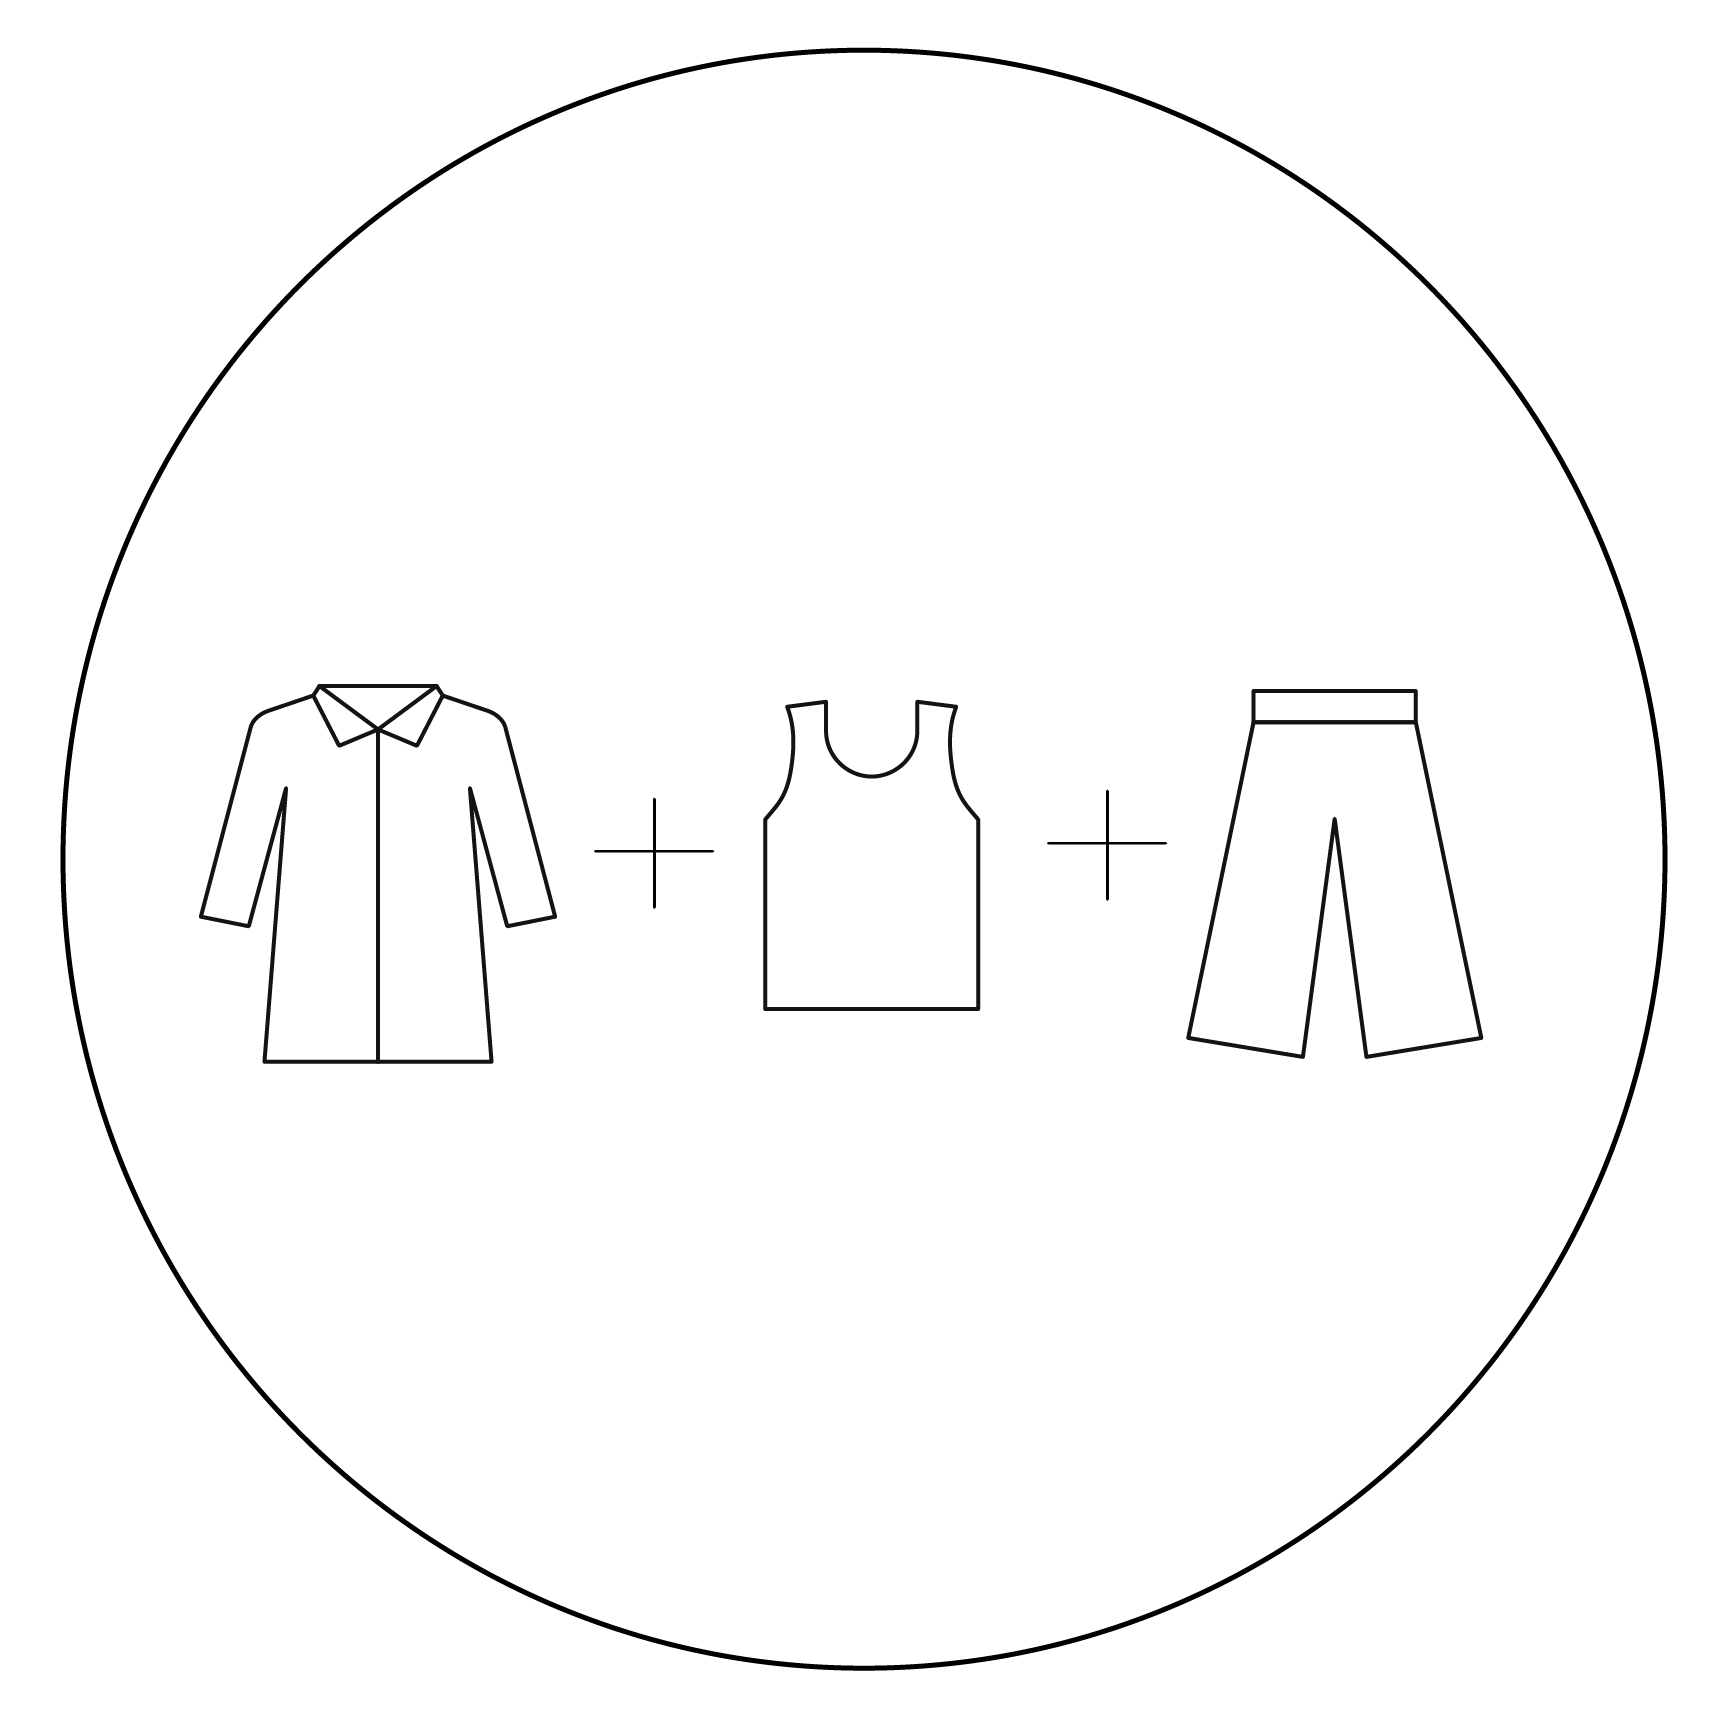 Graphic with shirt, tank top and pant icons with plus signs